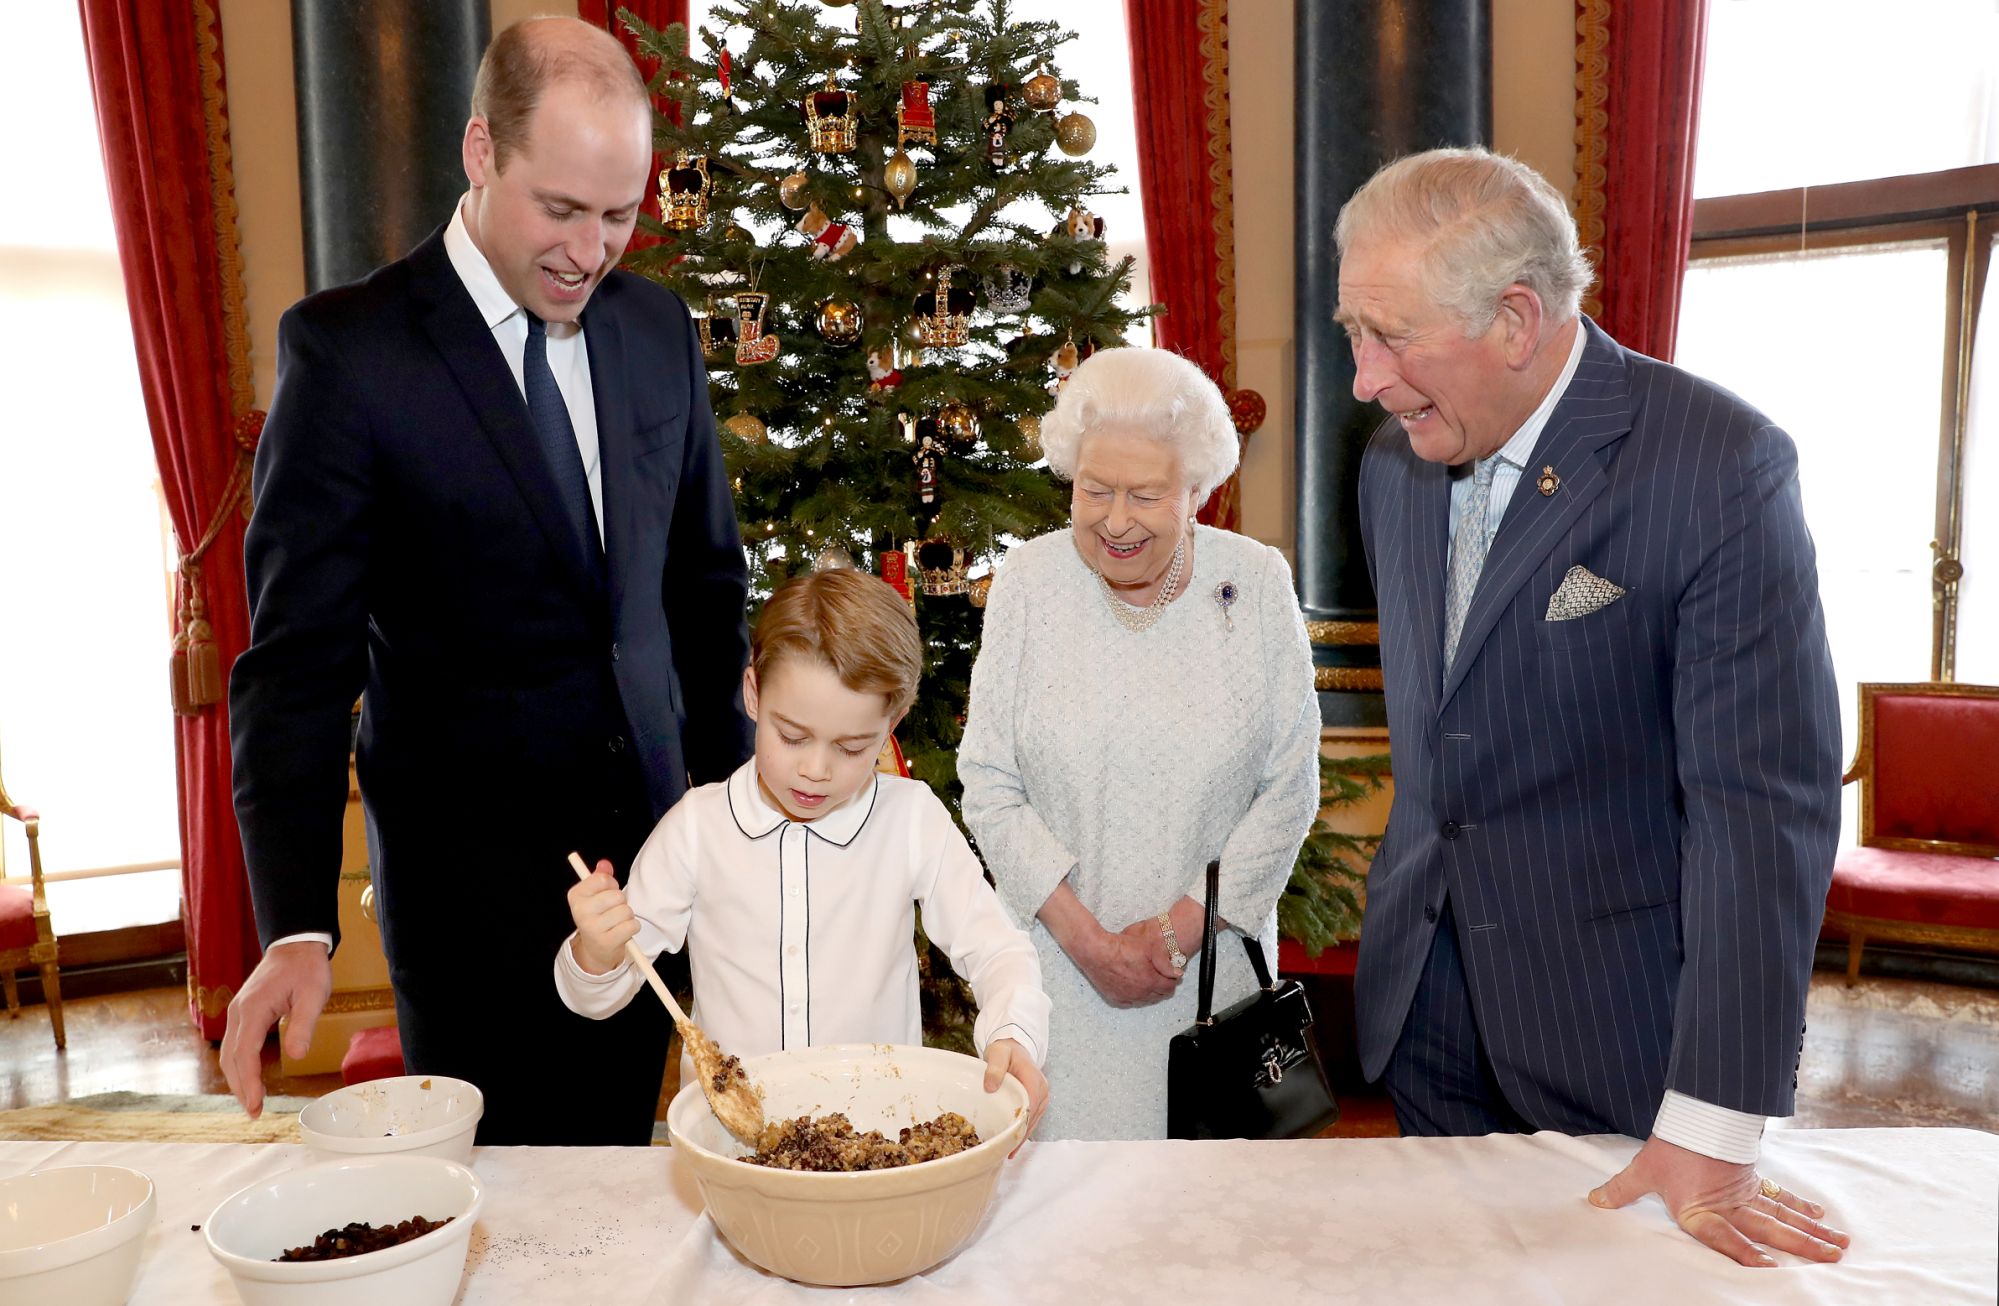 Christmas puddings made by Queen and Prince George donated to armed forces communities